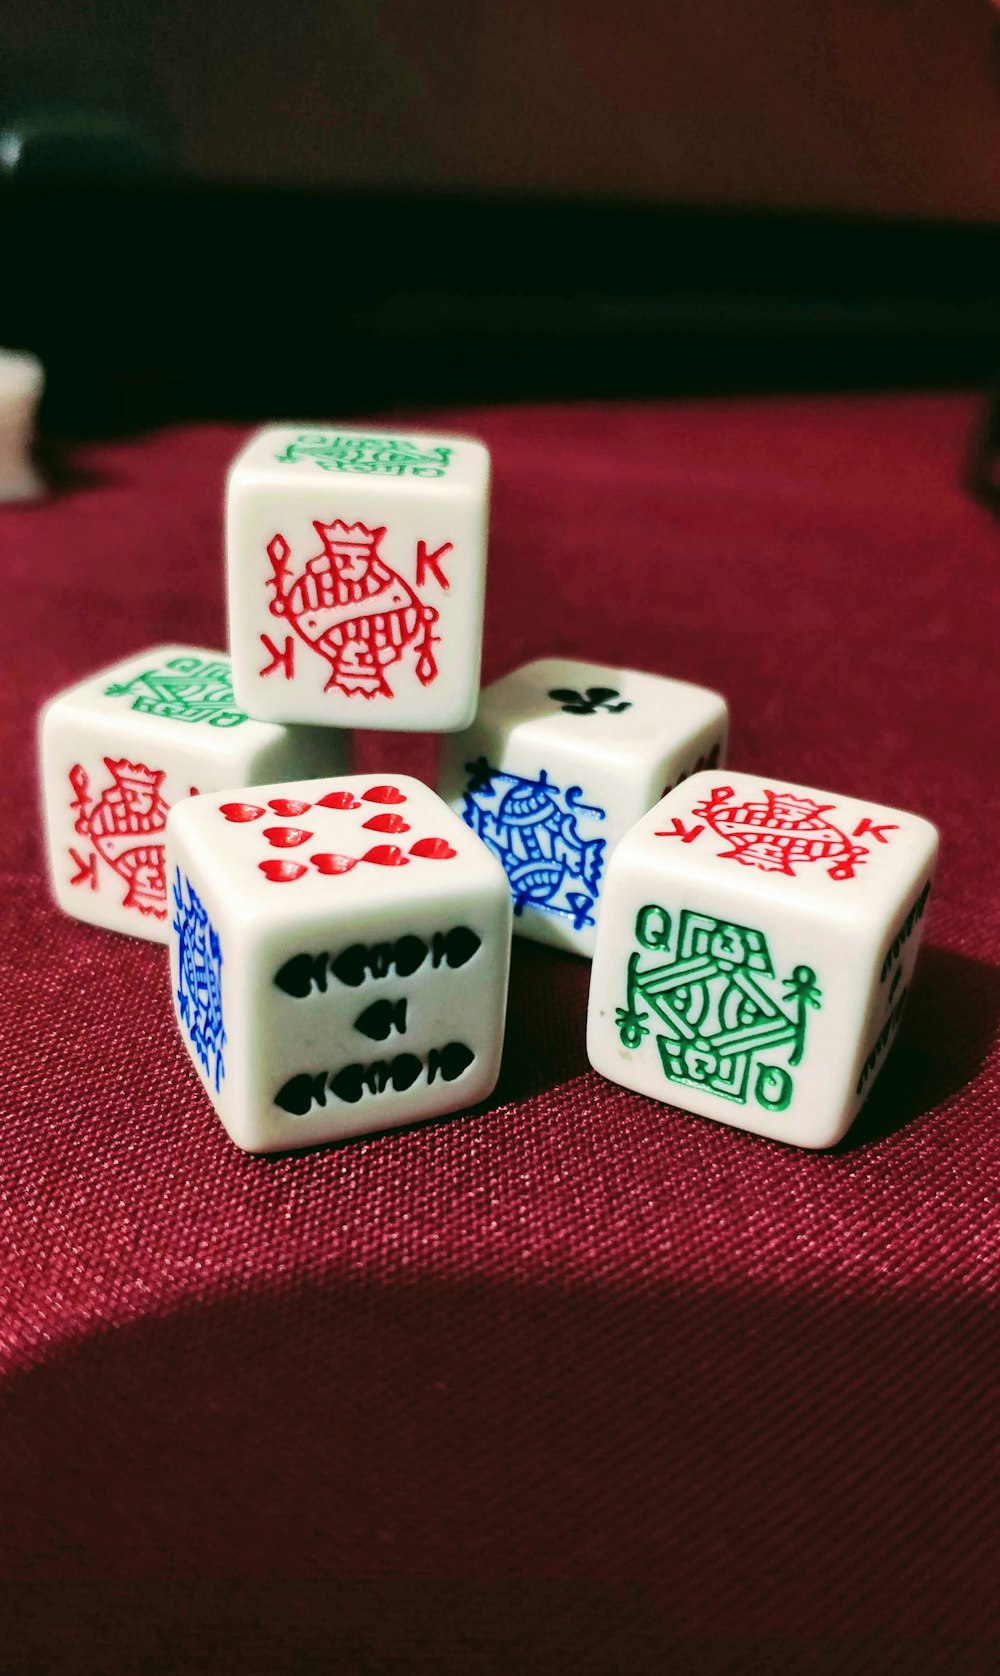 five playing dies on red cloth